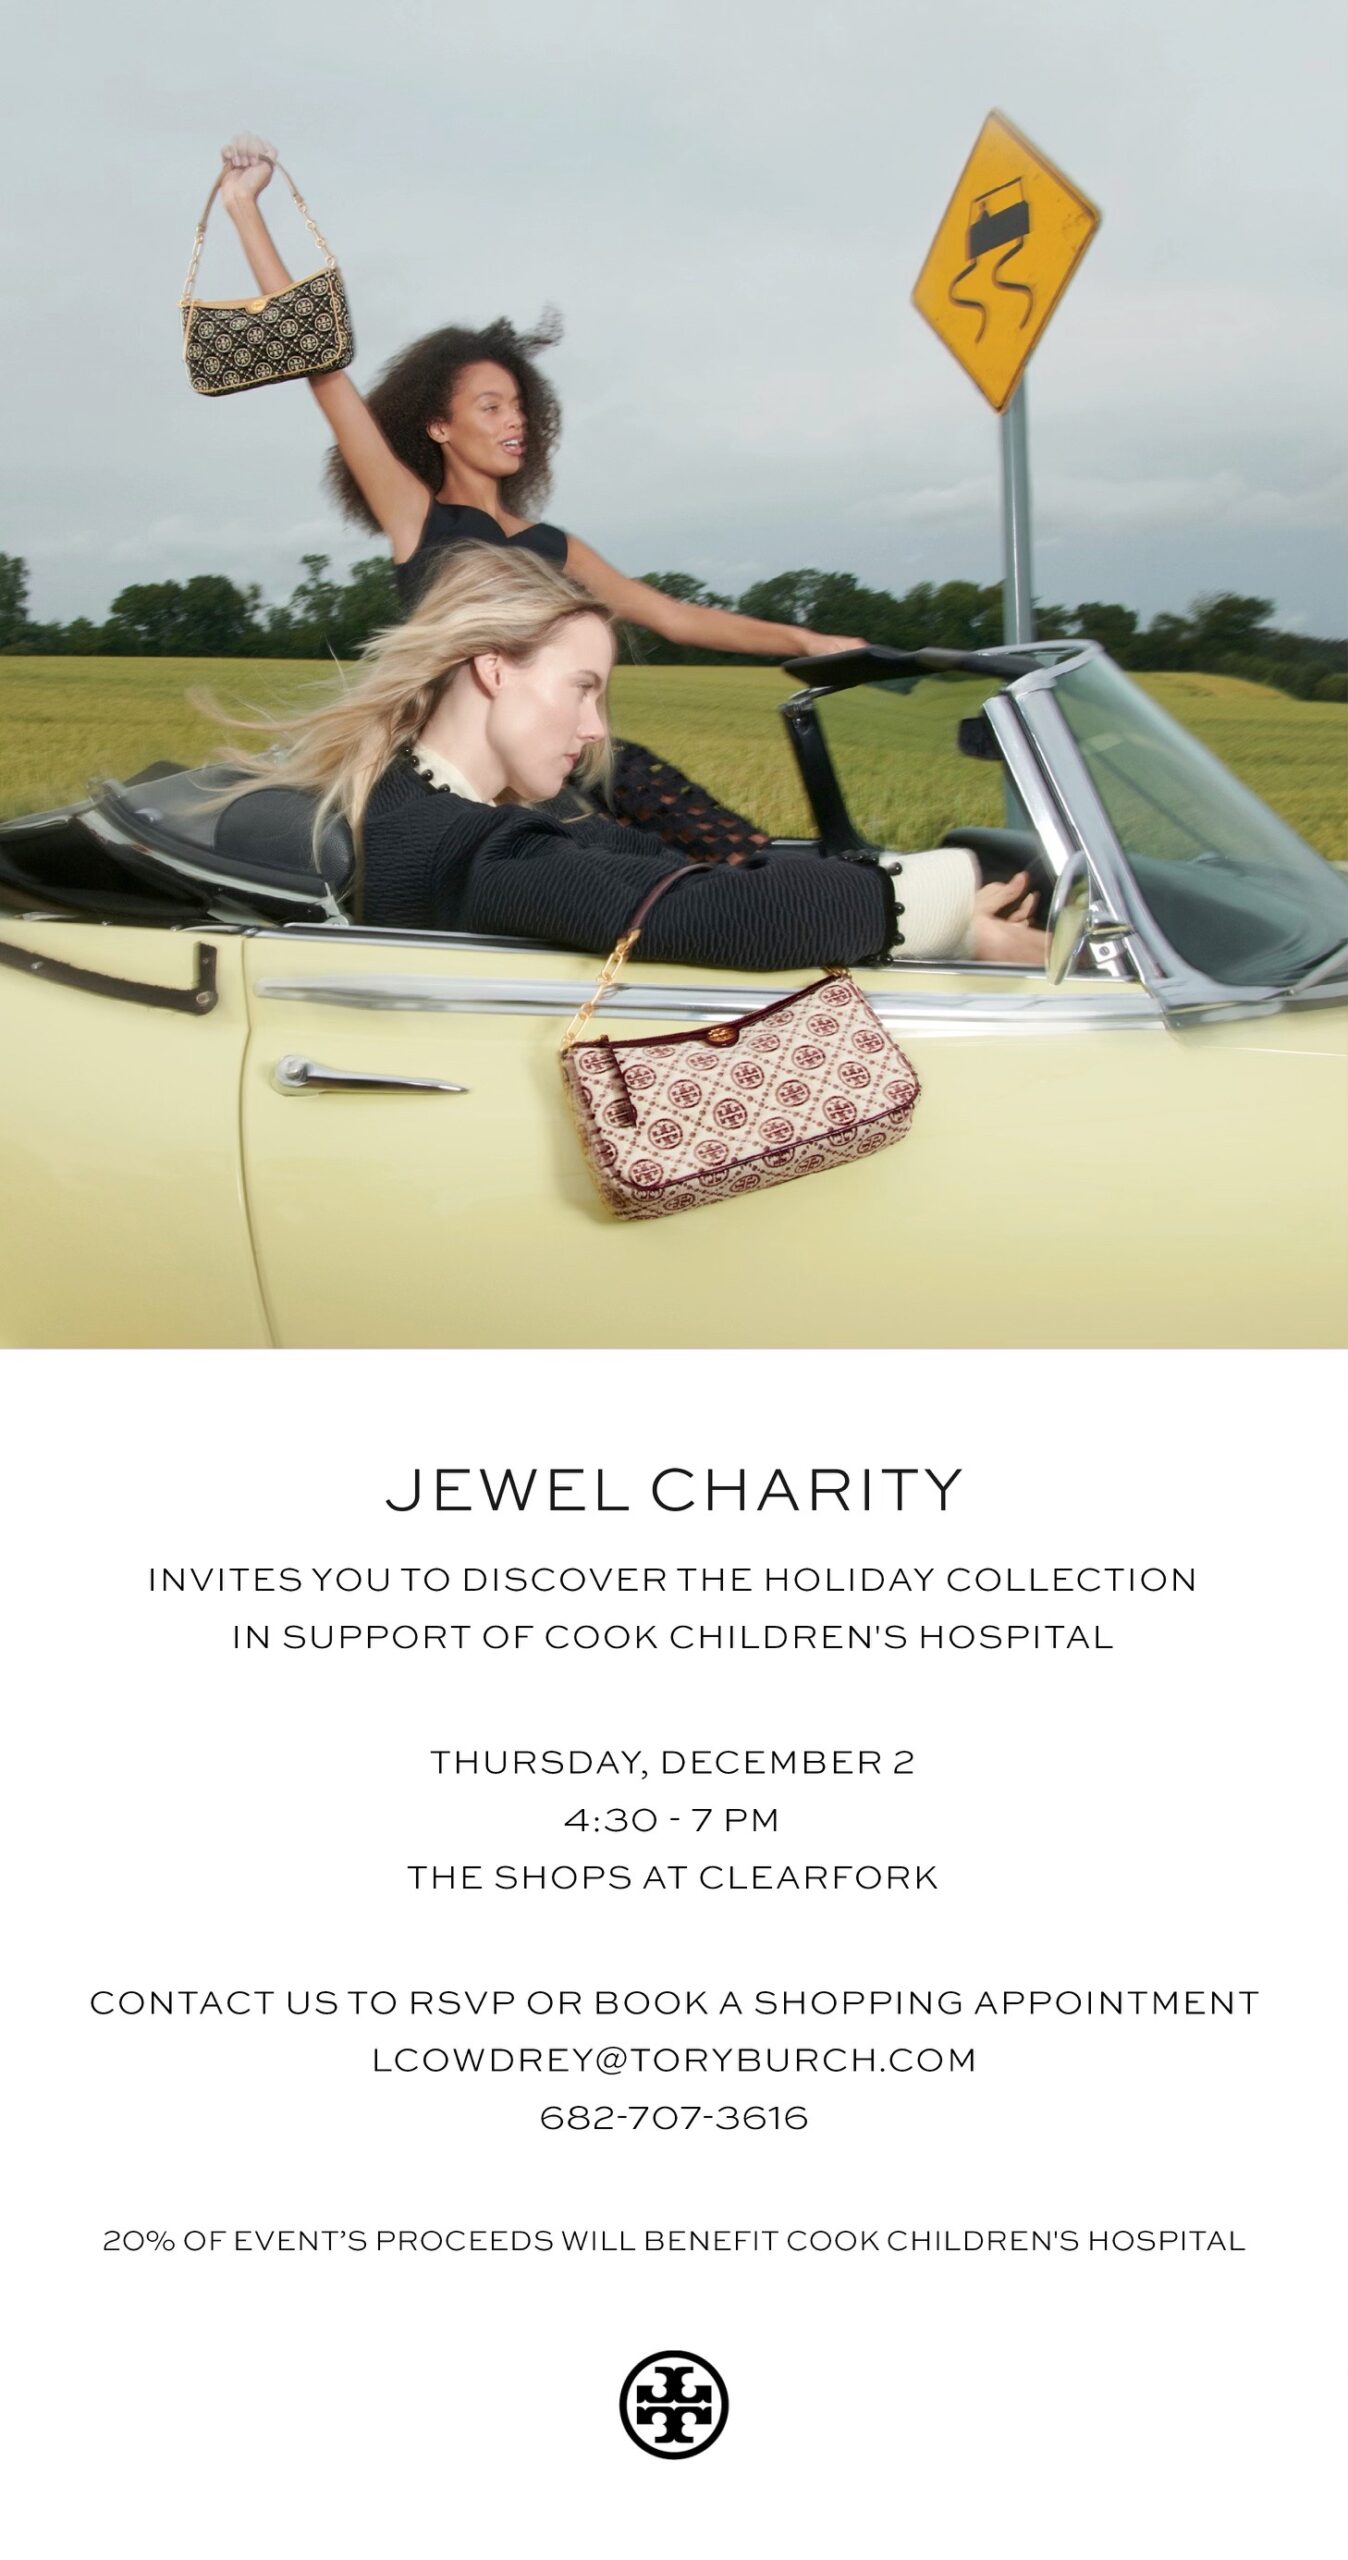 Jewel Charity event with Tory Burch #toryburch #jewelcharity #holidaycollection #holidaystyle #cookchildrensmedicalcenter #fundraiser #tiffanyblackmon 